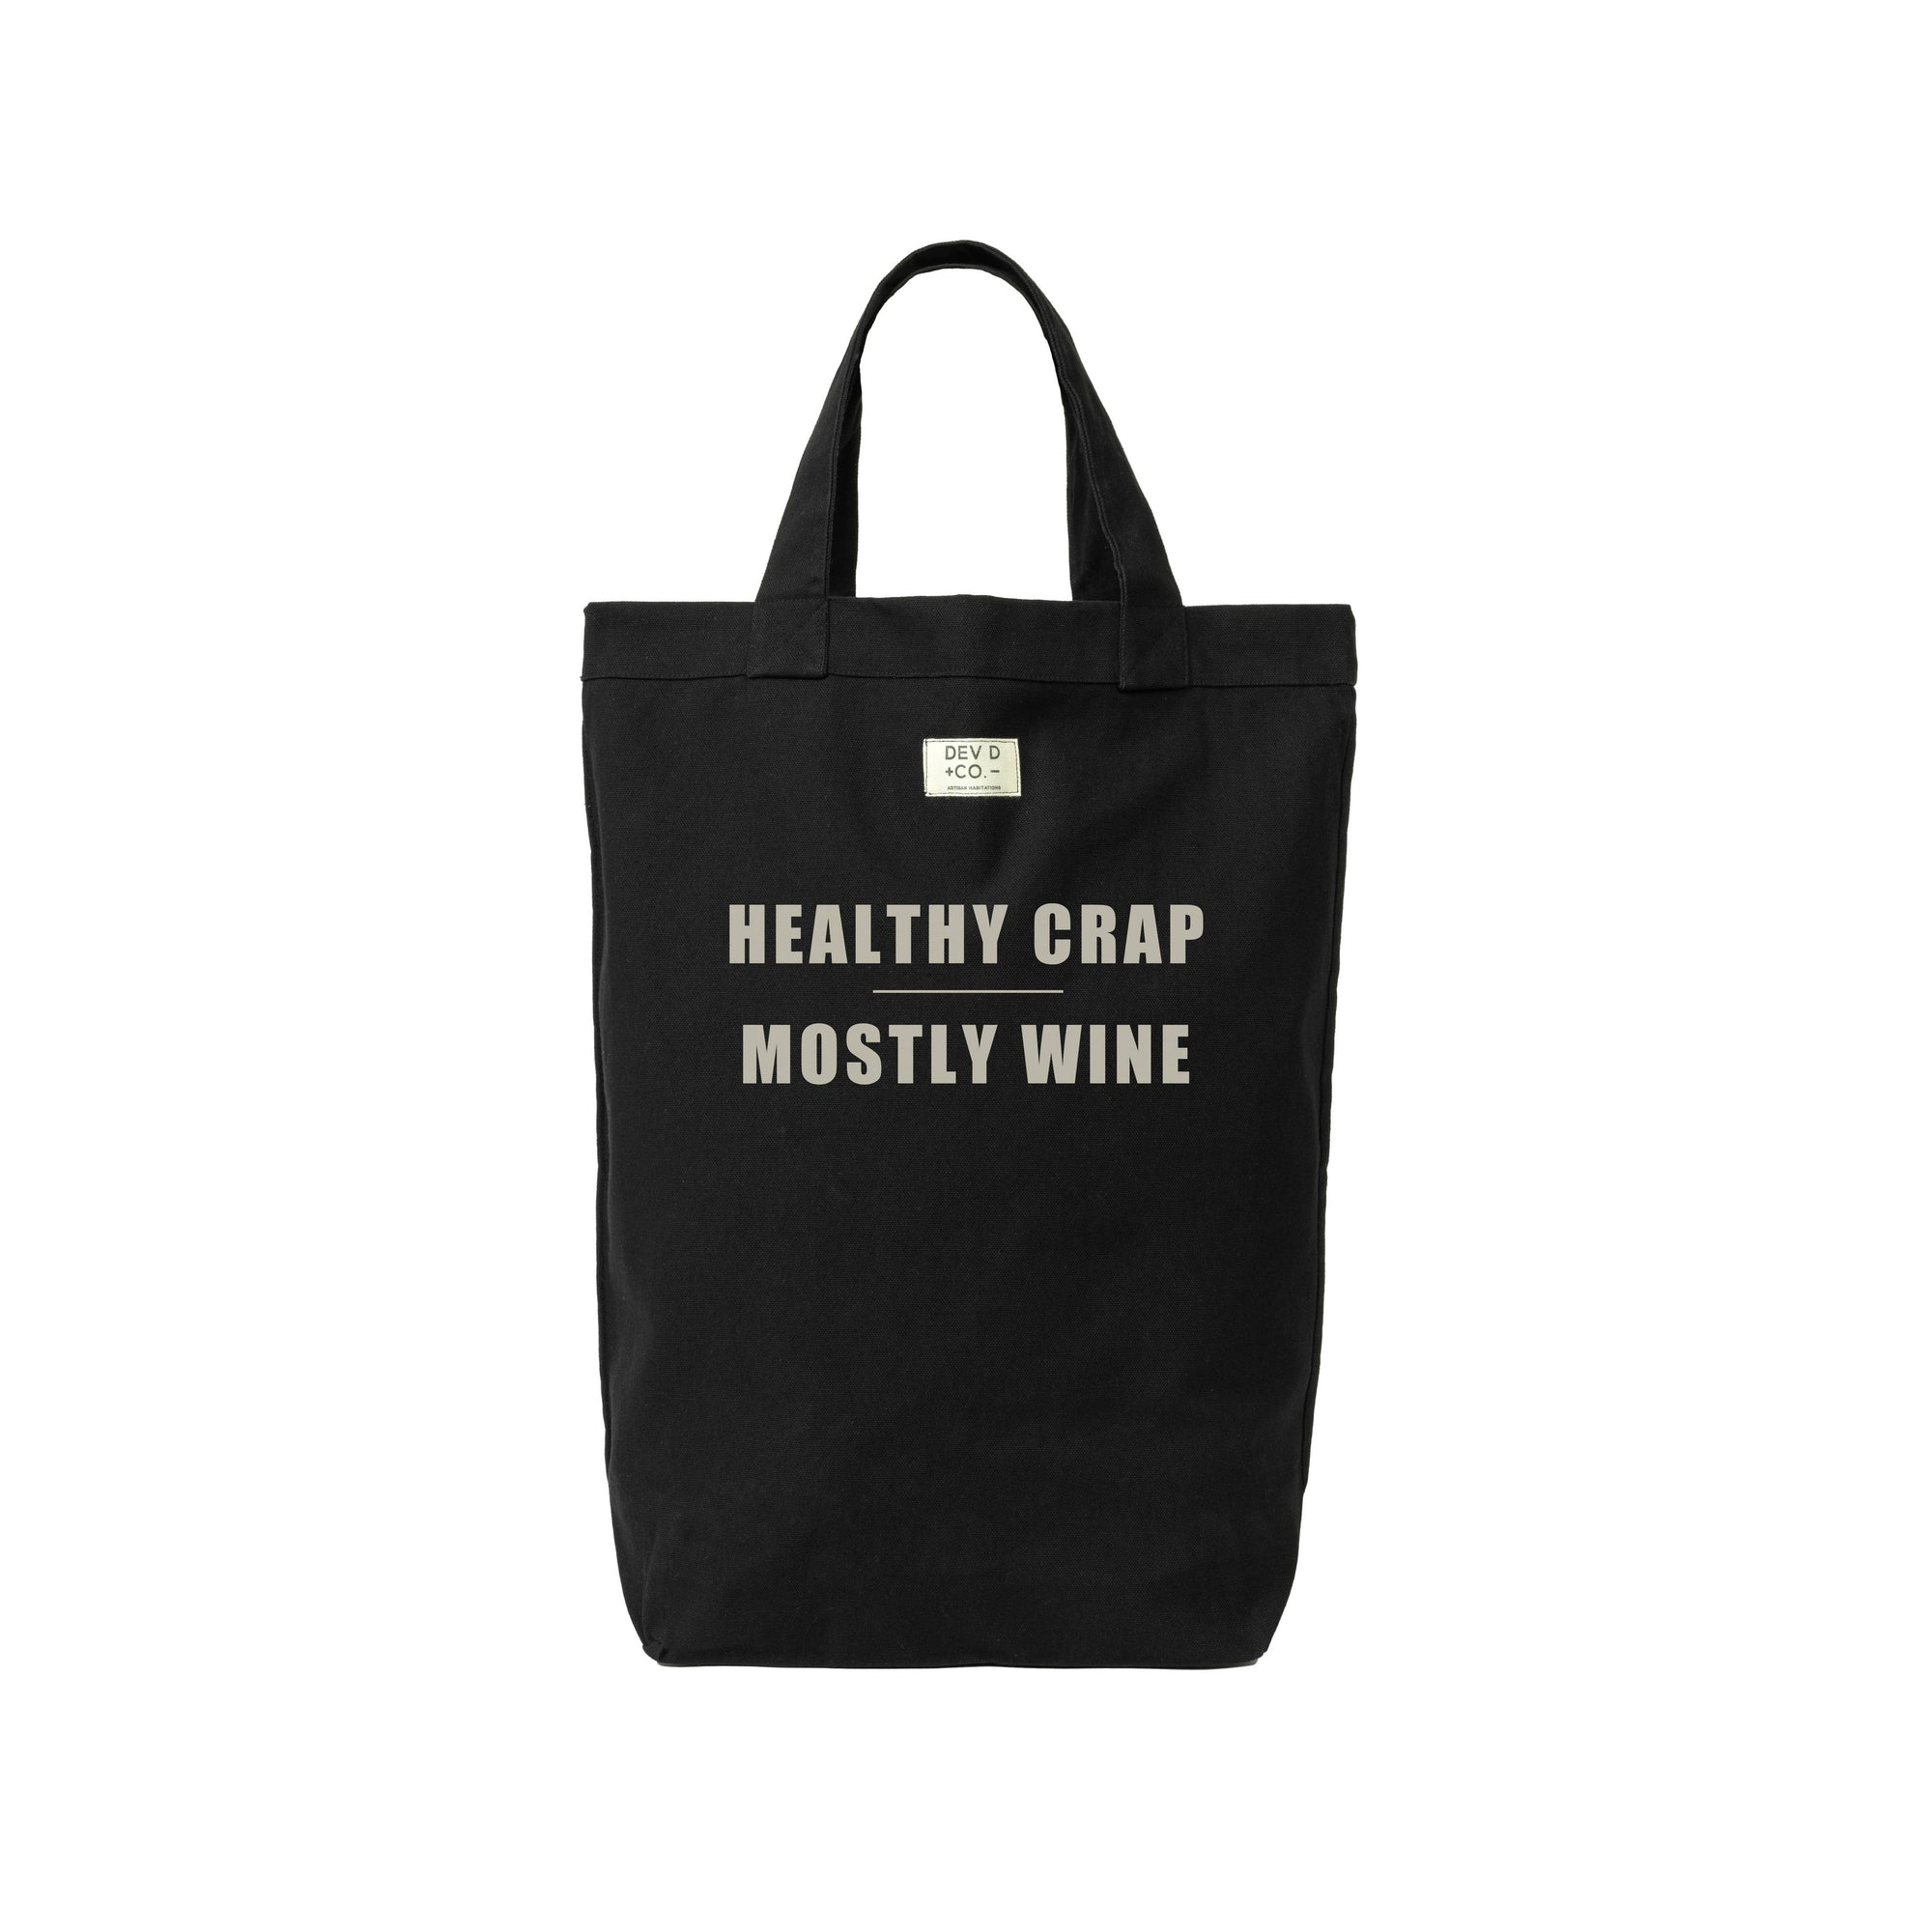 Tall rectangular shaped black canvas bag stands on a white background. Centered all capitals quote reads Healthy Crap Mostly Wine.